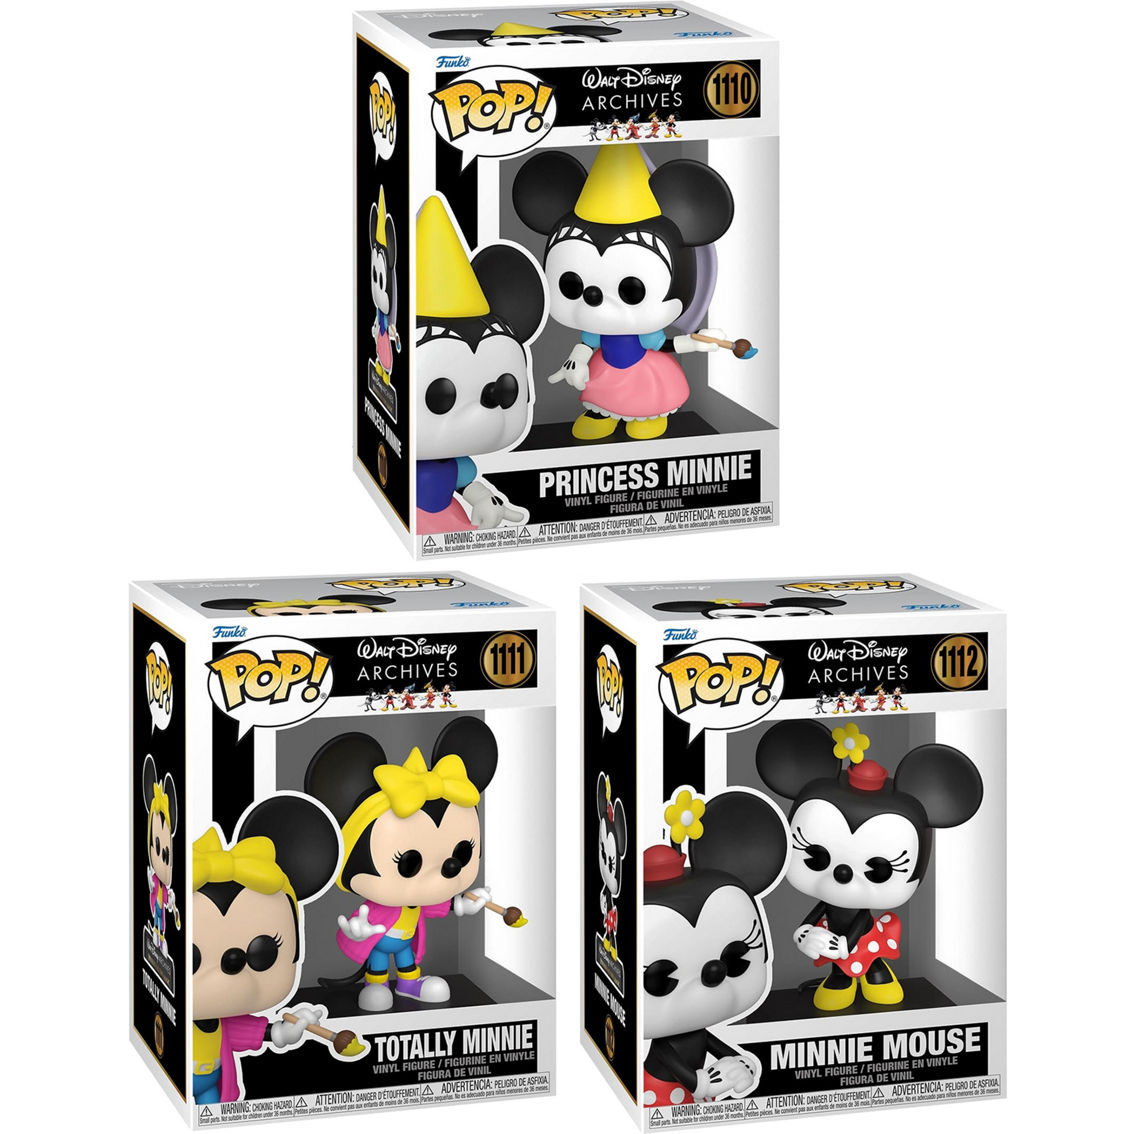 Funko POP! Disney Minnie Mouse Collector Set - Image 2 of 5